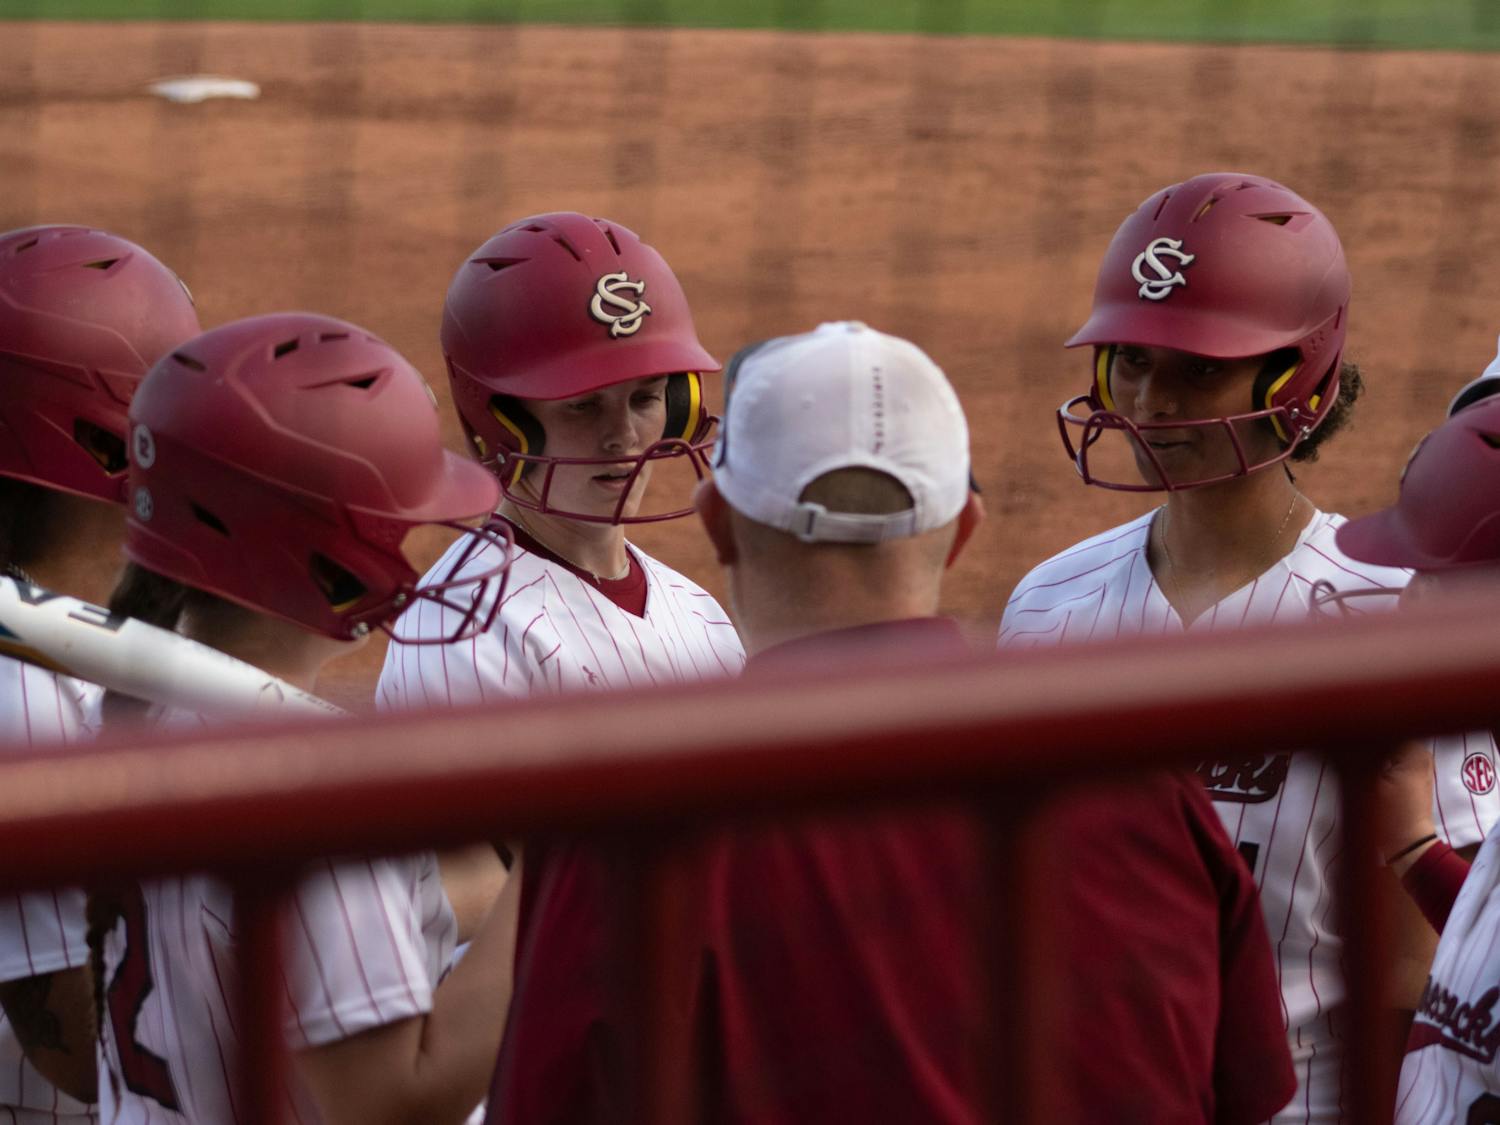 Gamecock softball players gather around assistant coach Josh Bloomer during a timeout in the game against the University of Florida on March 31, 2023, at Beckham Field. The Gamecocks beat the Gators 13-10 in the first game of the series.&nbsp;